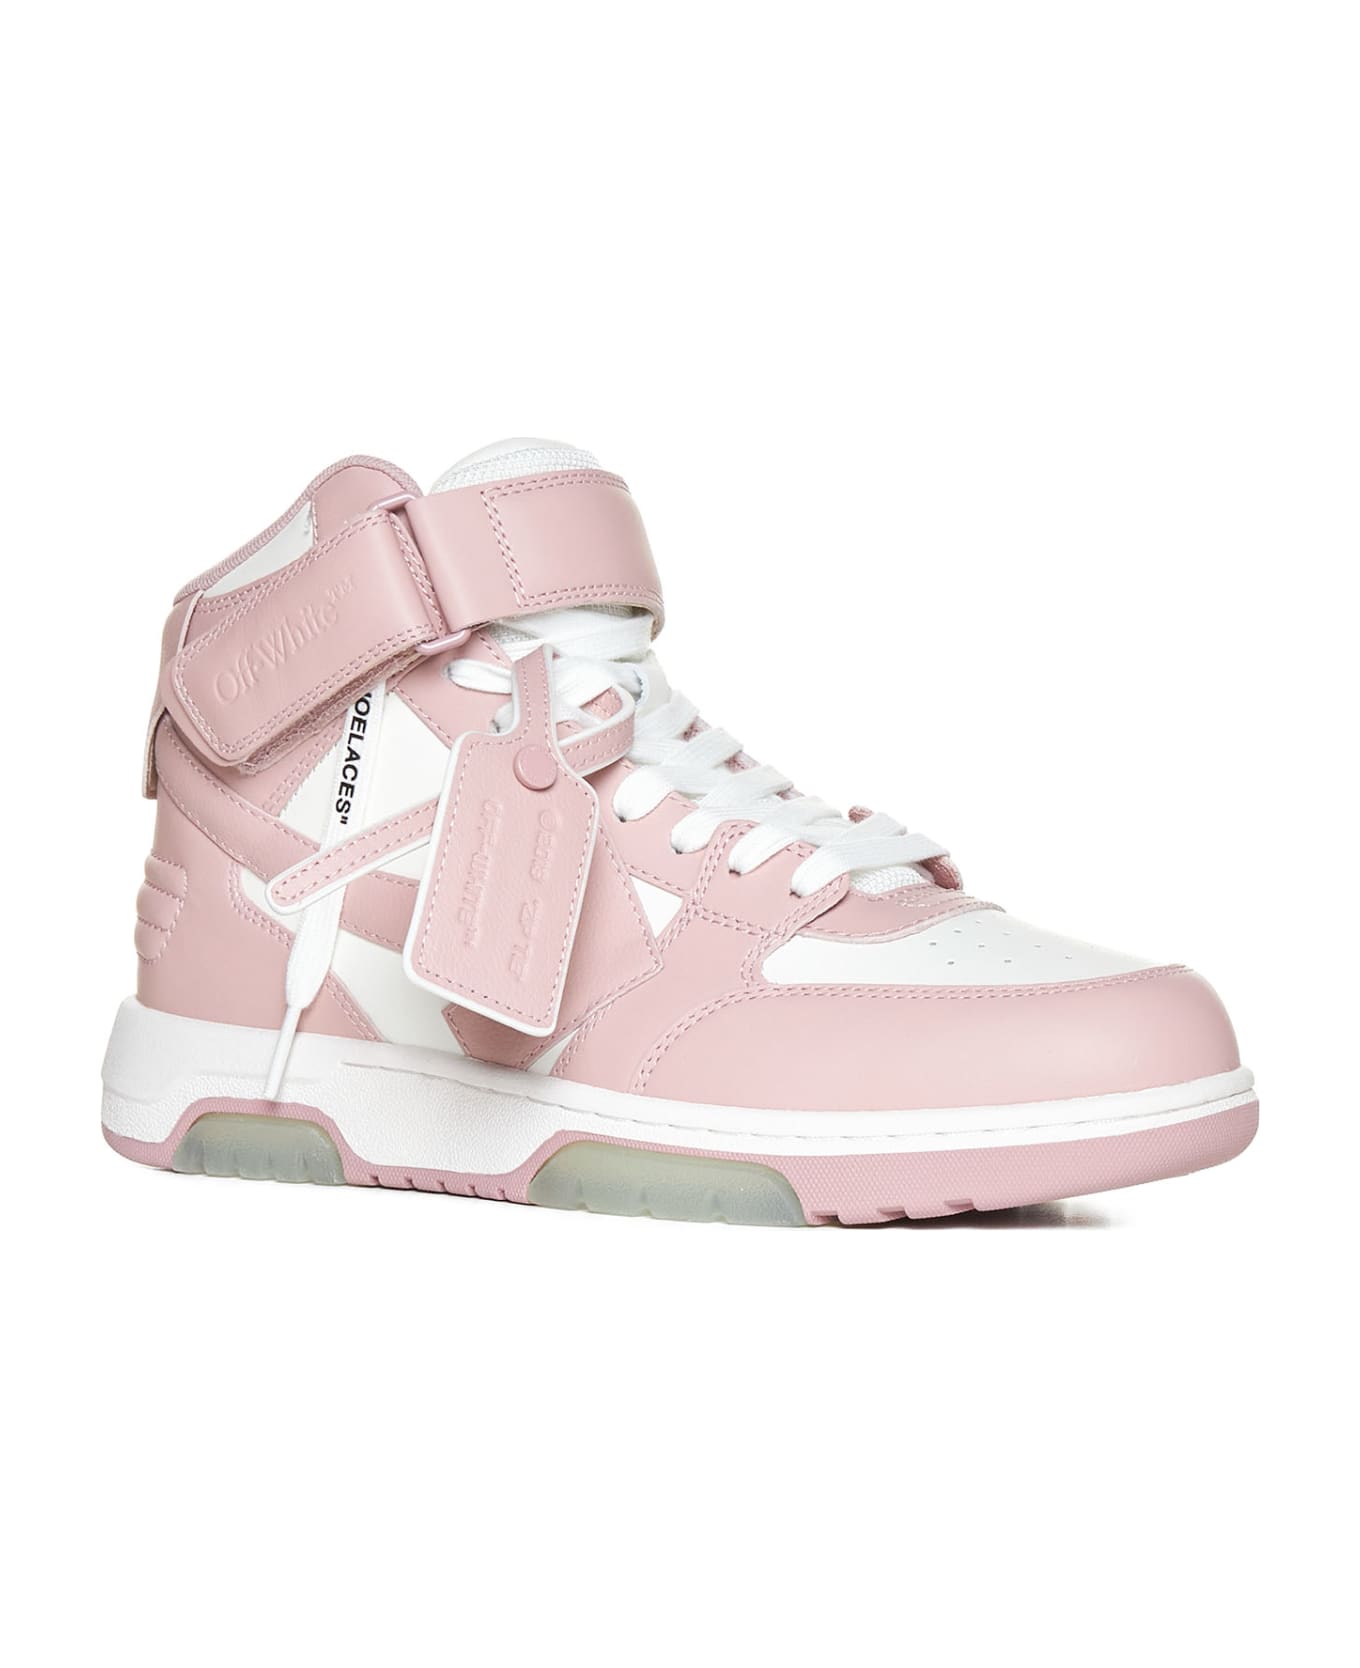 Off-White Sneakers - Pink スニーカー